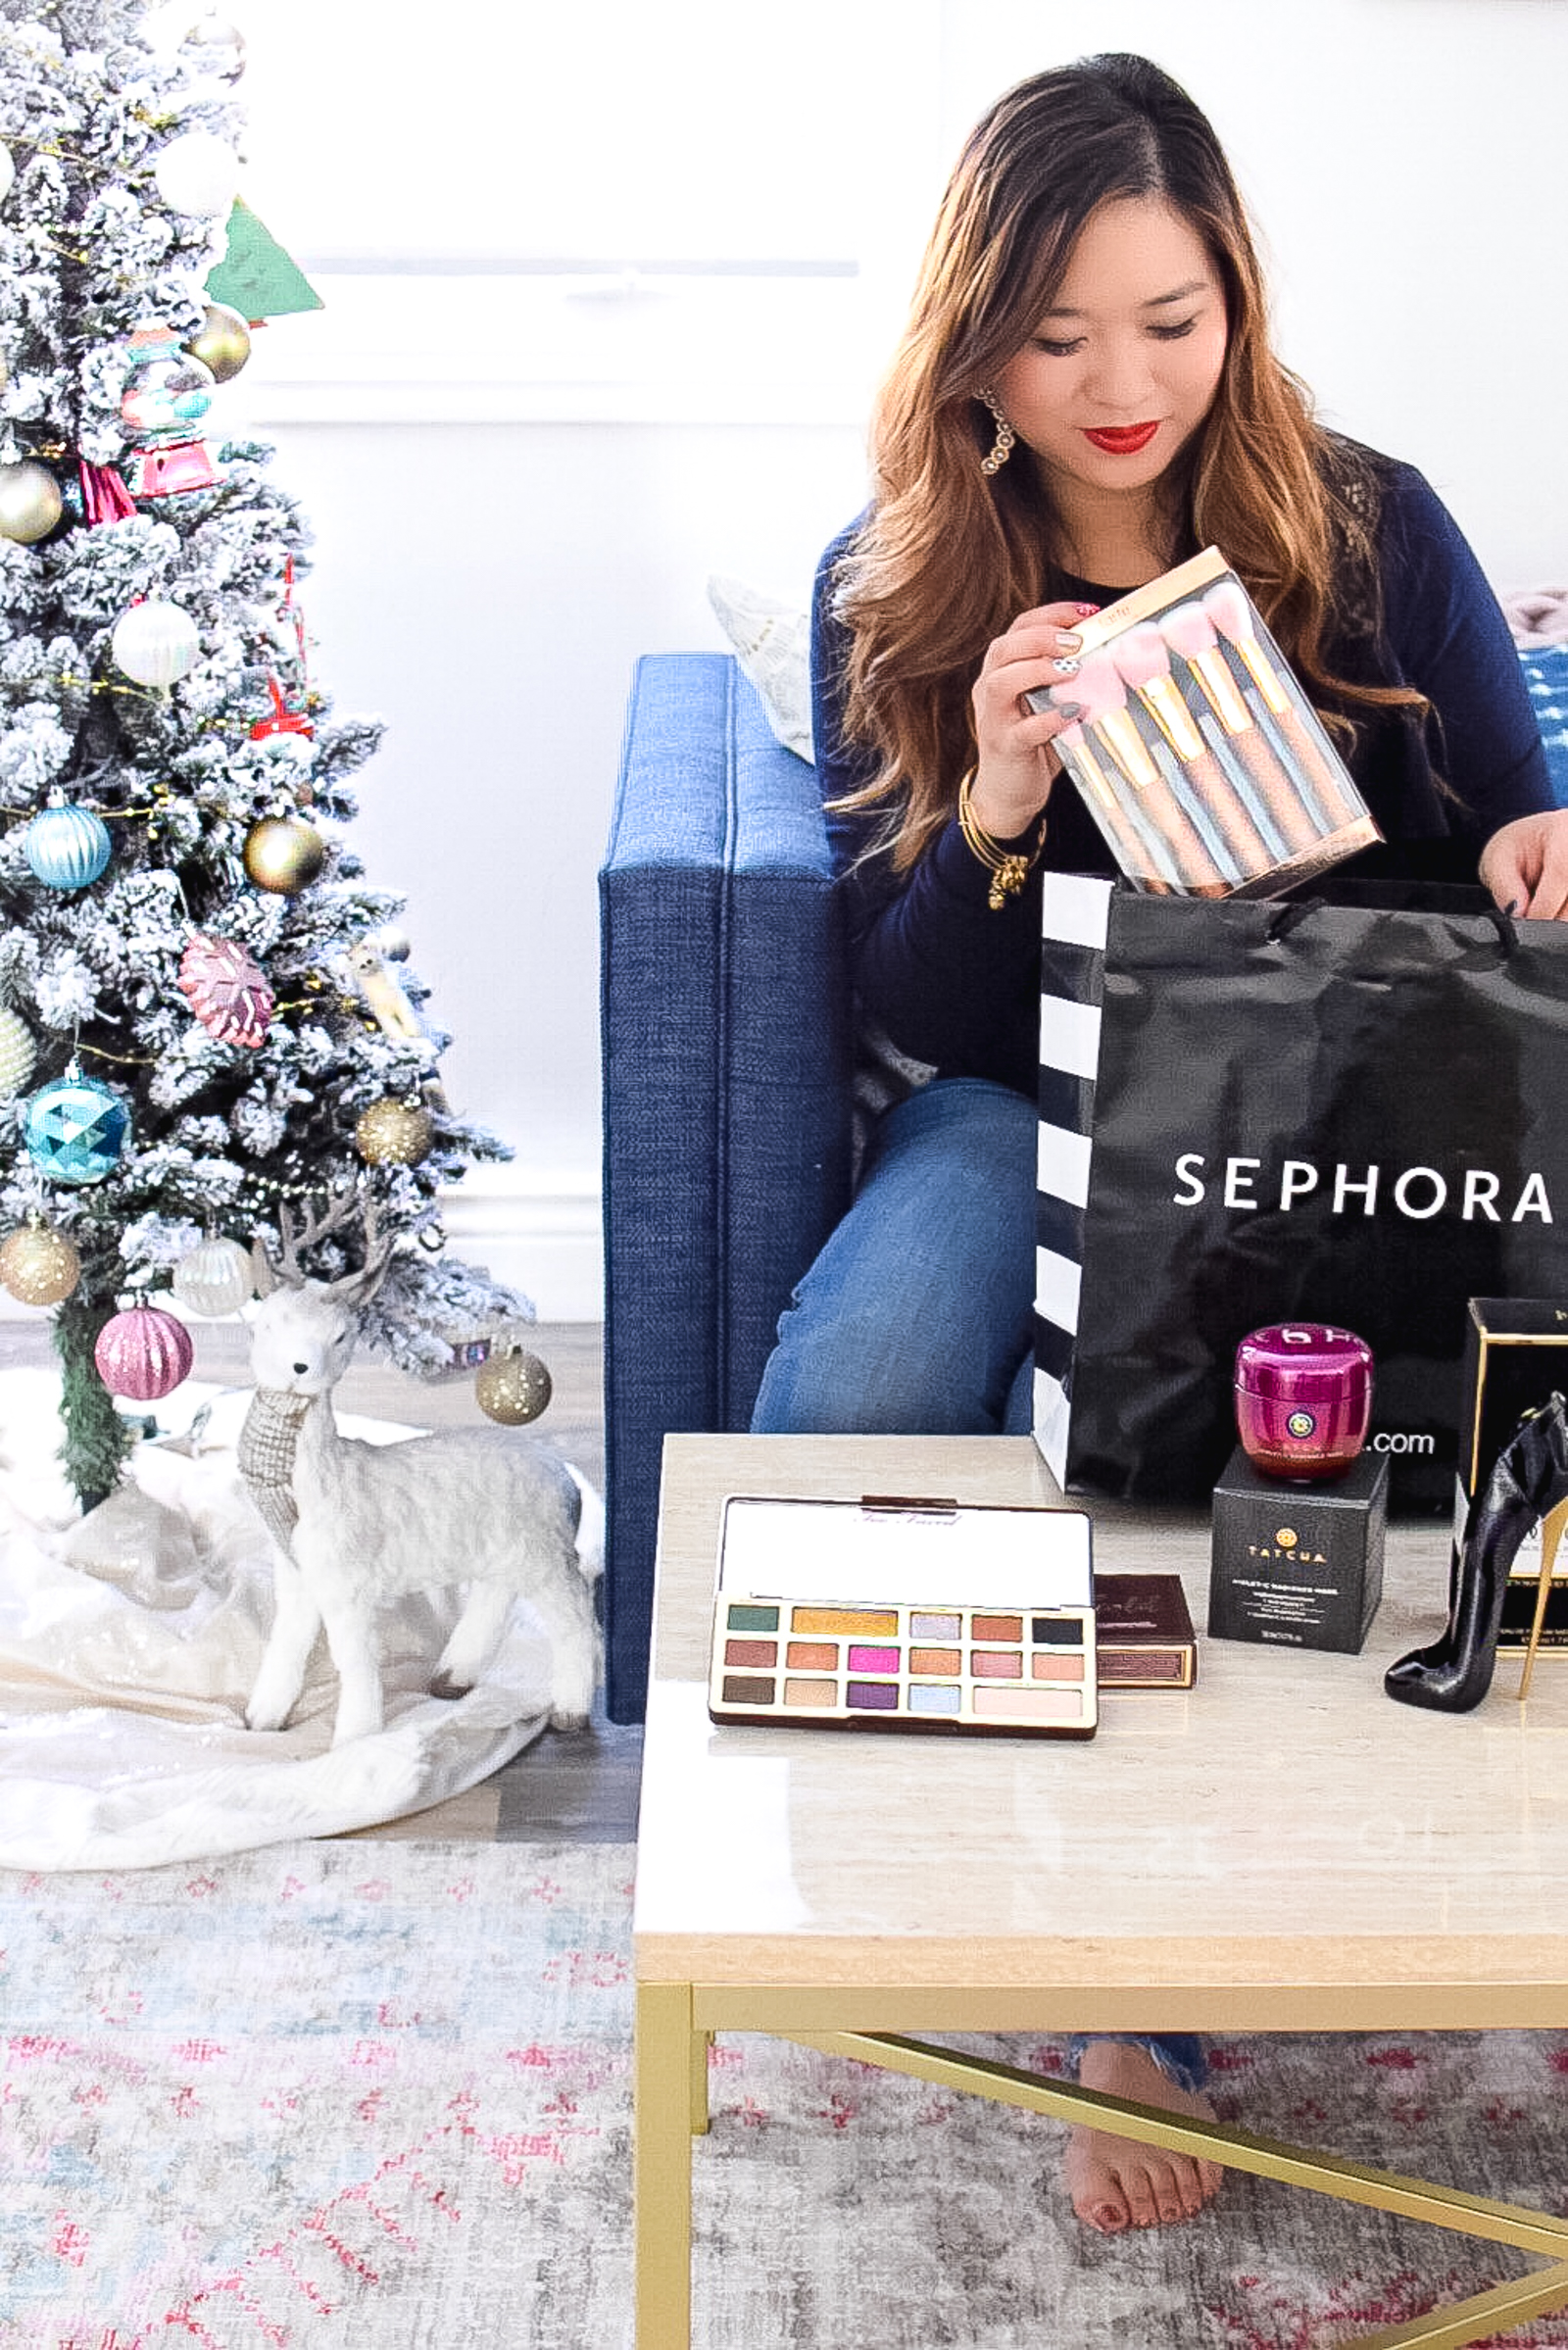 Last Minute Beauty Gift Ideas from Sephora inside JCPenney by popular Utah style blogger Sandy A La Mode